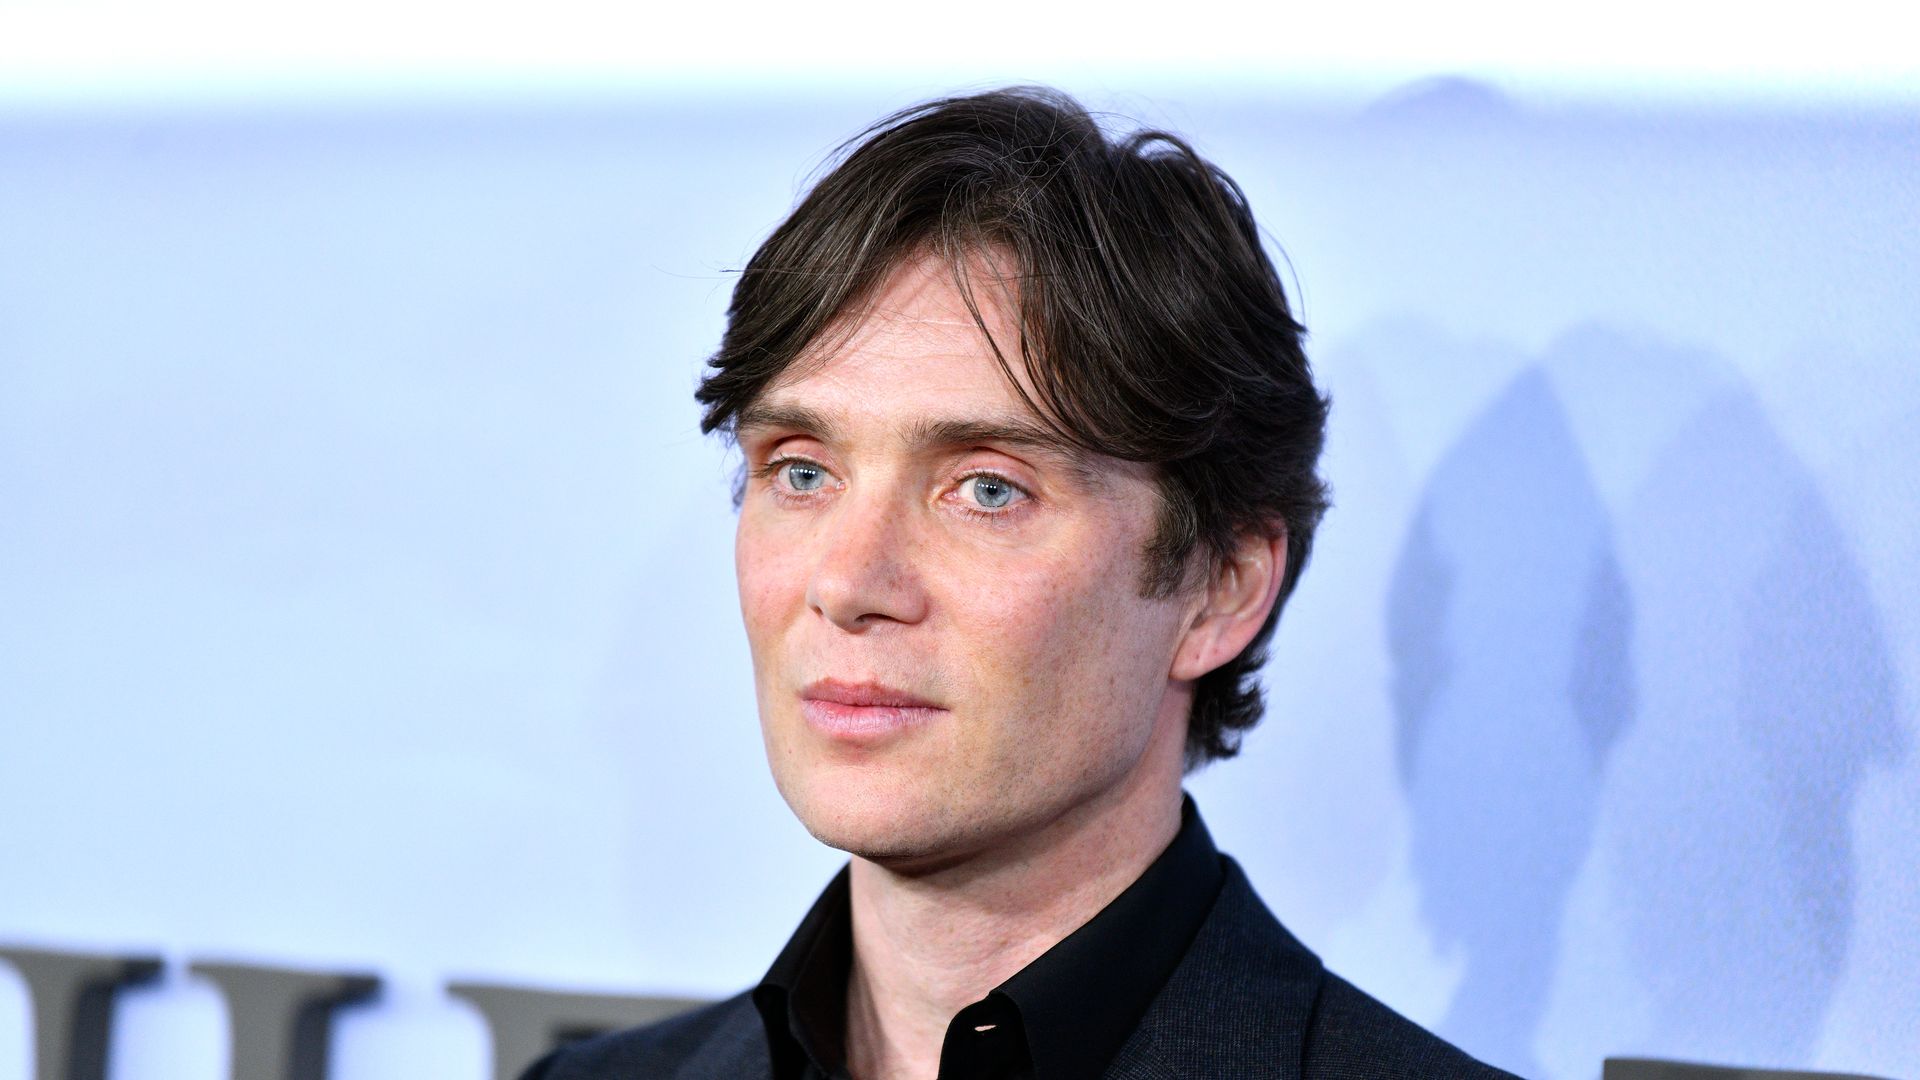 Cillian Murphy attends the World Premiere of "A Quiet Place Part II" presented by Paramount Pictures